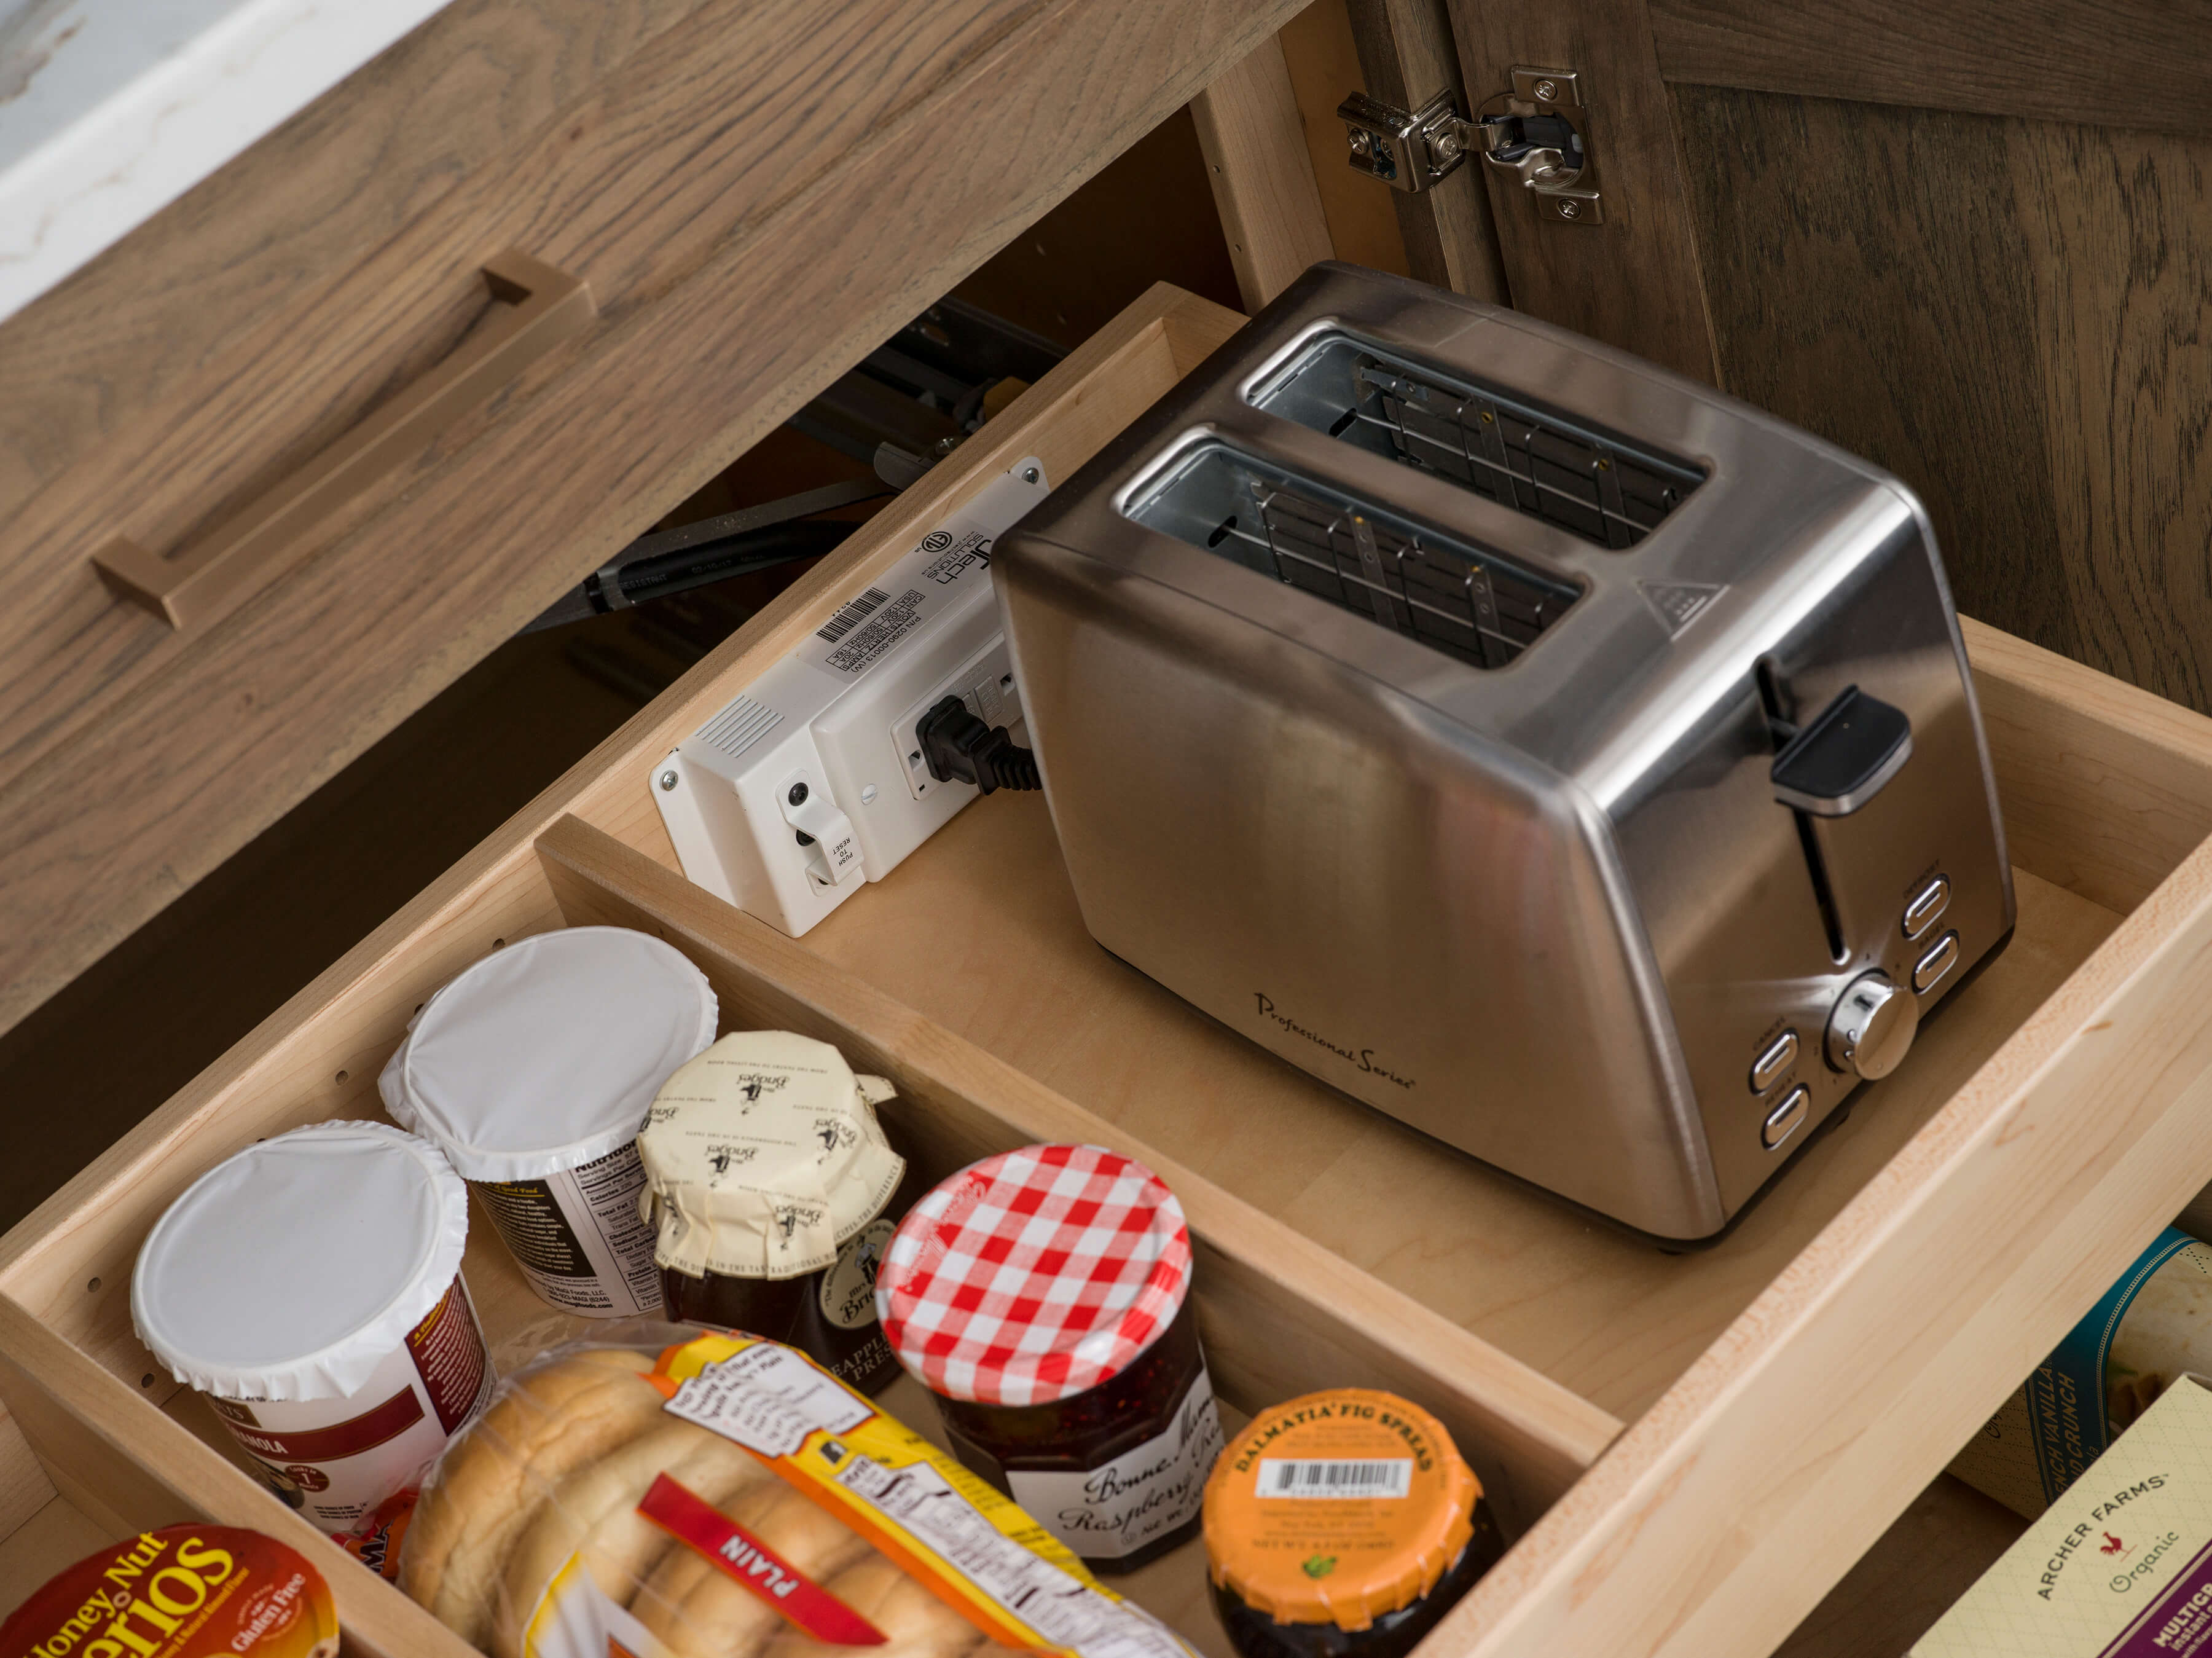 Add more function to a simple Roll-Out Shelf with a Power Station to house and power your small kitchen appliances, helping keep your counters clutter-free. Roll-out shelf storage in a base cabinet makes it easier to reach items in the back of the cabinet.